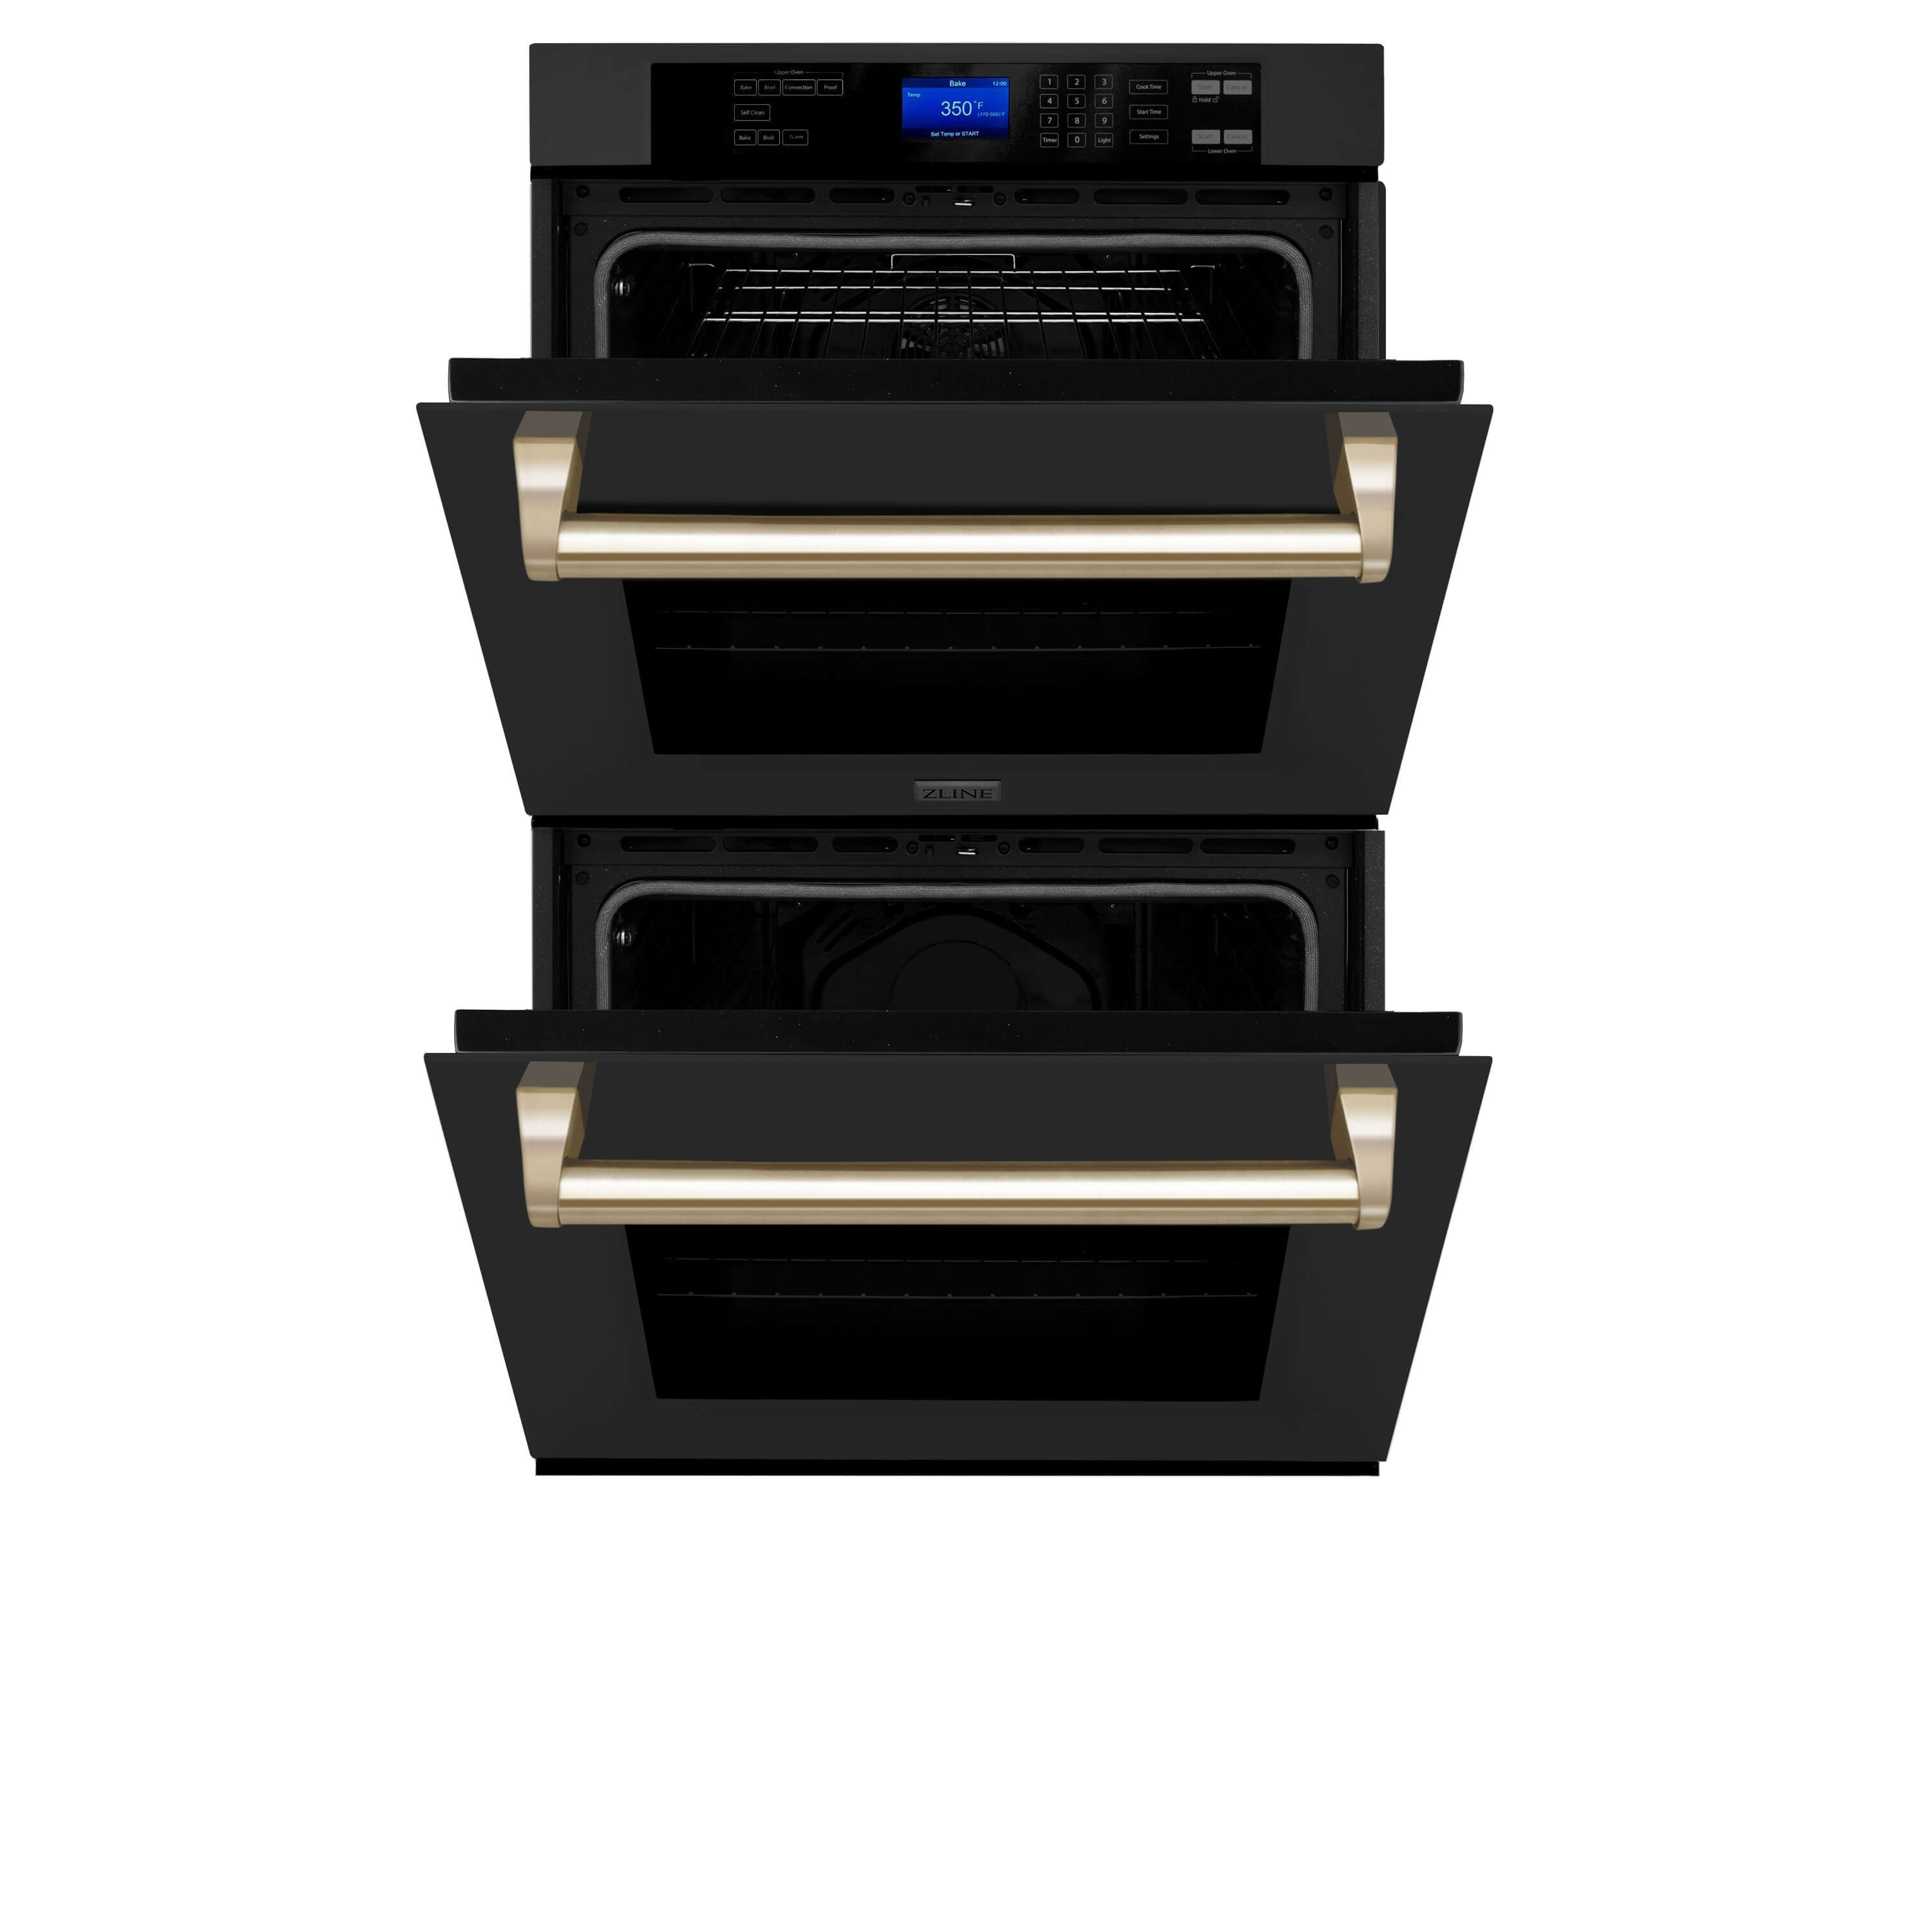 ZLINE 30 in. Autograph Edition Electric Double Wall Oven with Self Clean and True Convection in Black Stainless Steel and Polished Gold Accents (AWDZ-30-BS-G)